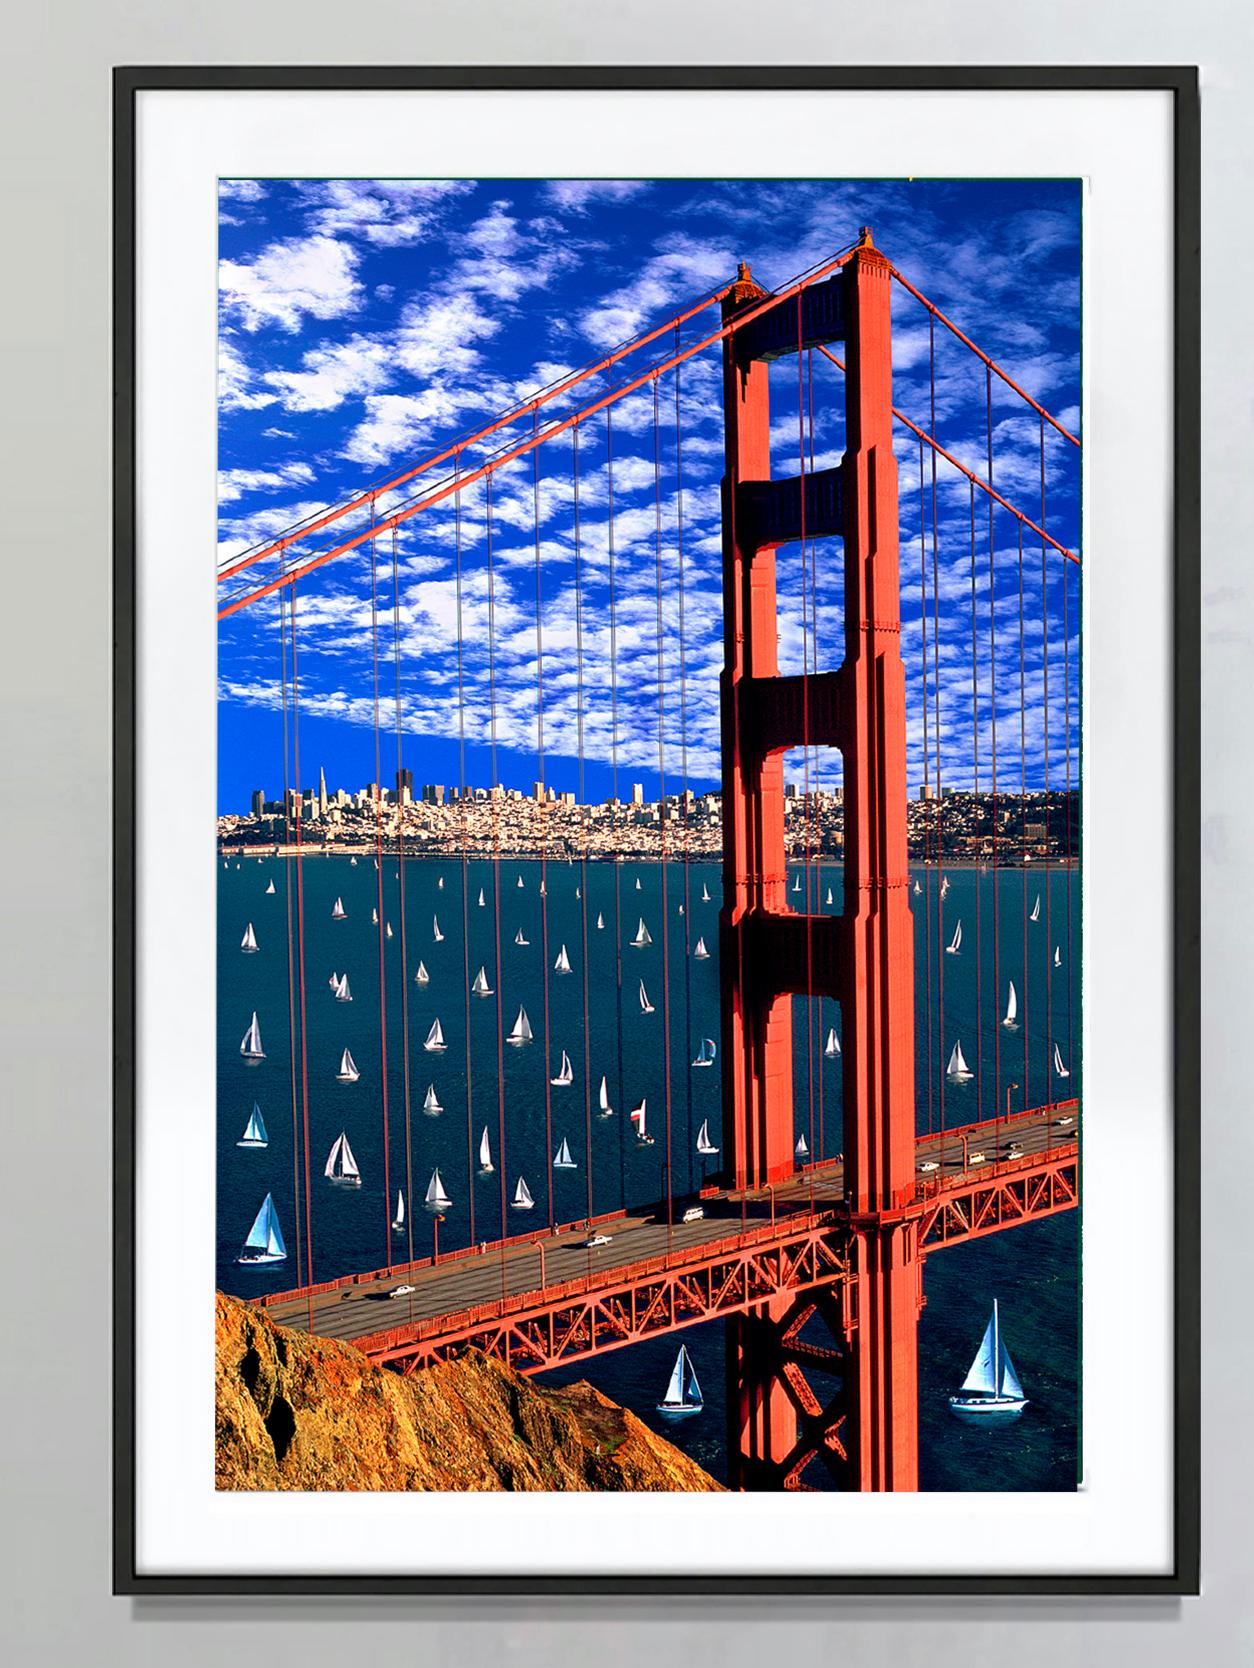 Golden Gate Bridge San Francisco Bay with Sailboats  - Photograph by Mitchell Funk